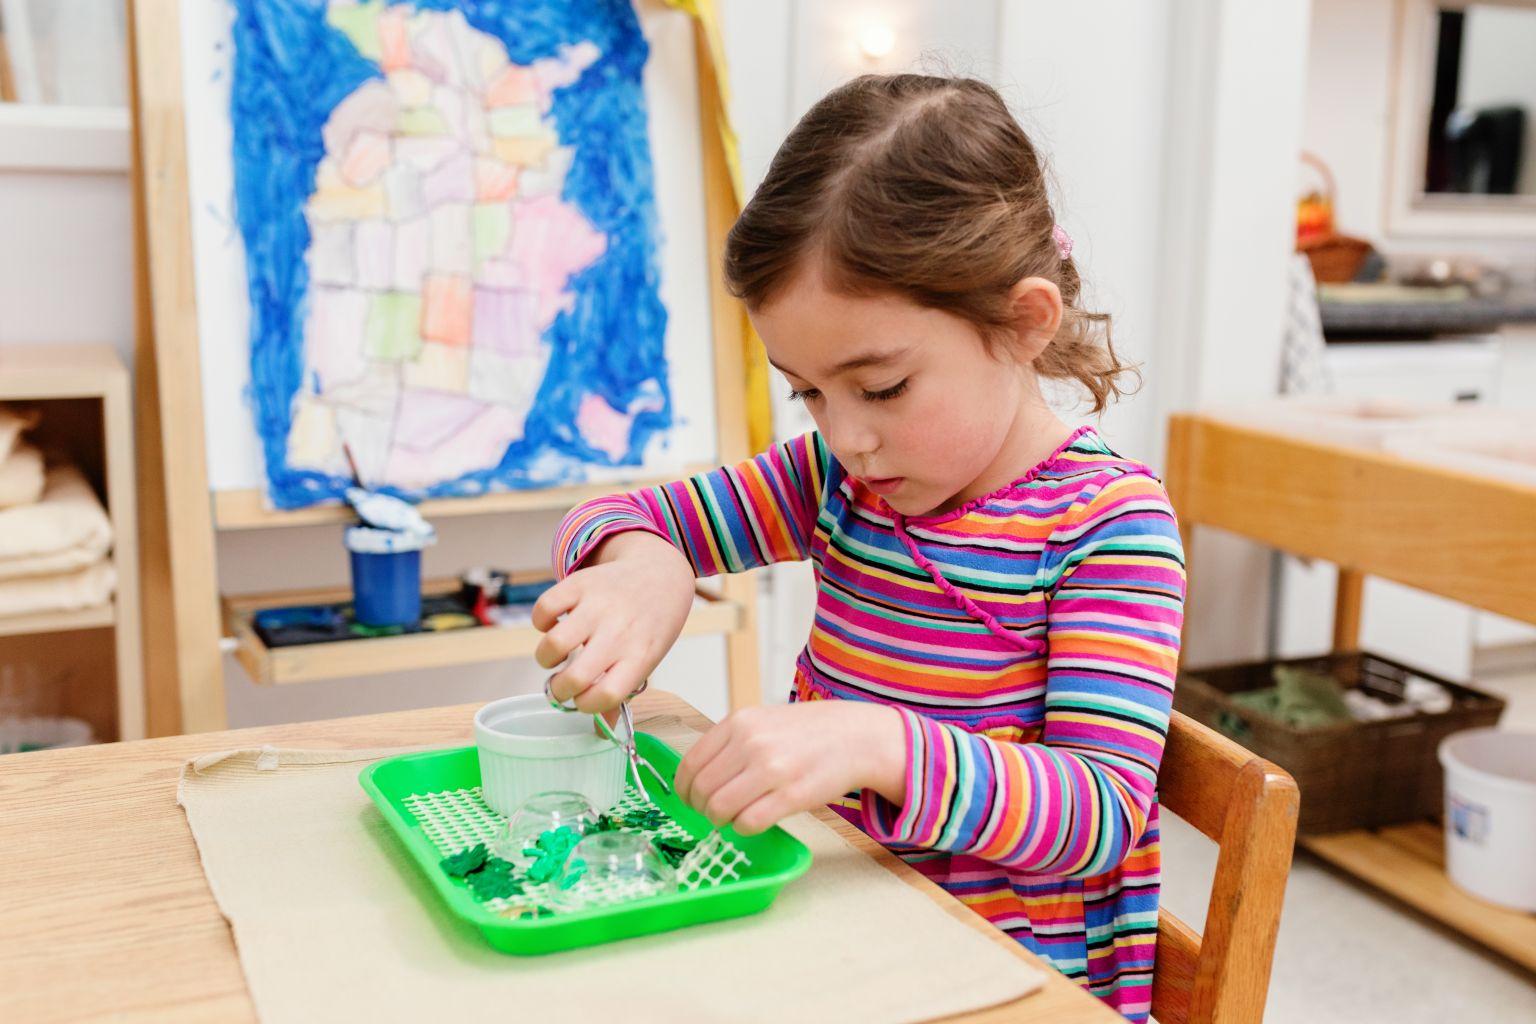 What is Montessori School pros and cons?